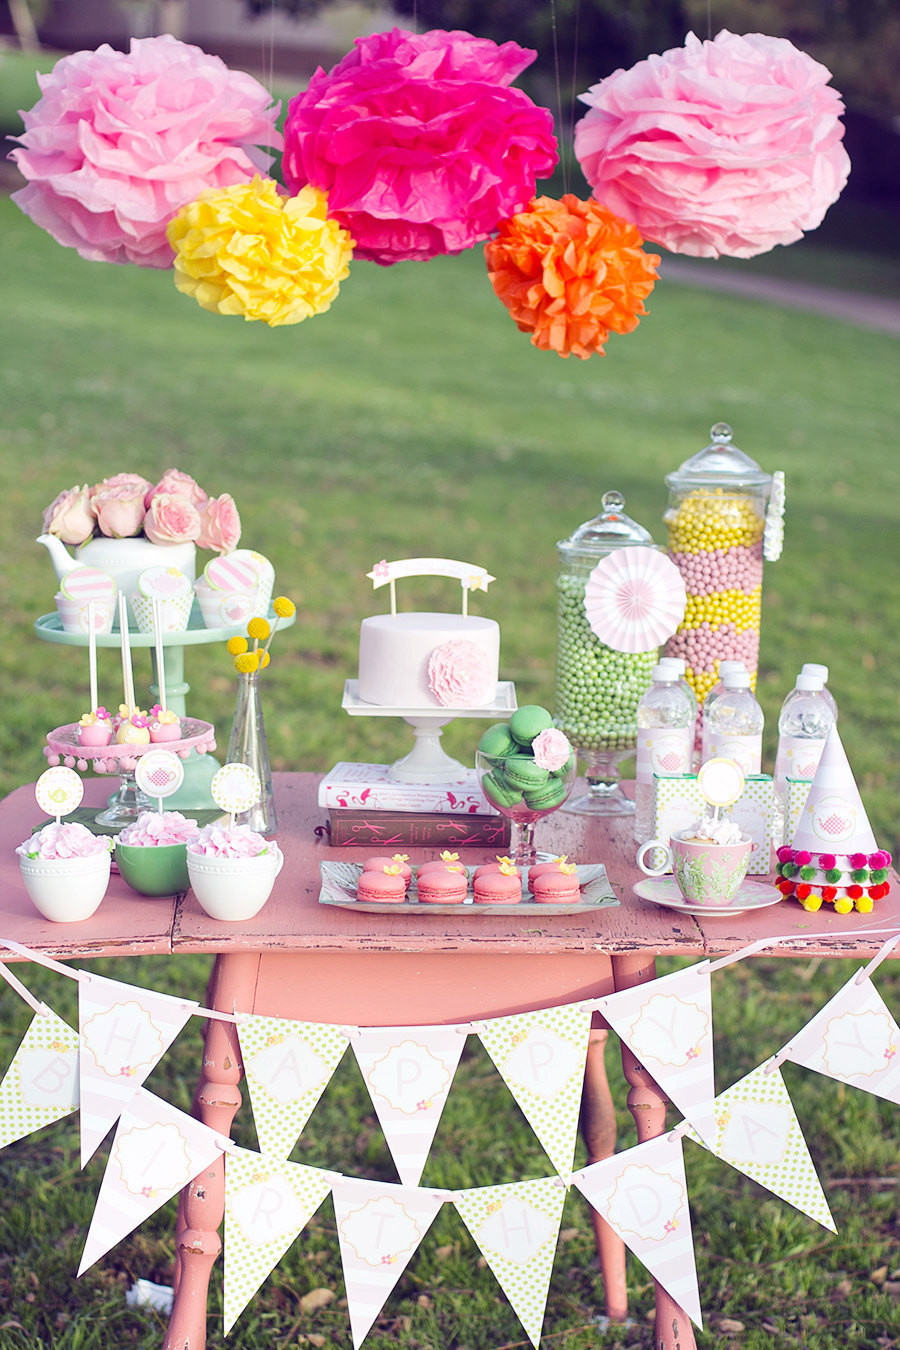 Backyard Tea Party Ideas
 Printable Garden Tea Party Package Featured on Hostess with